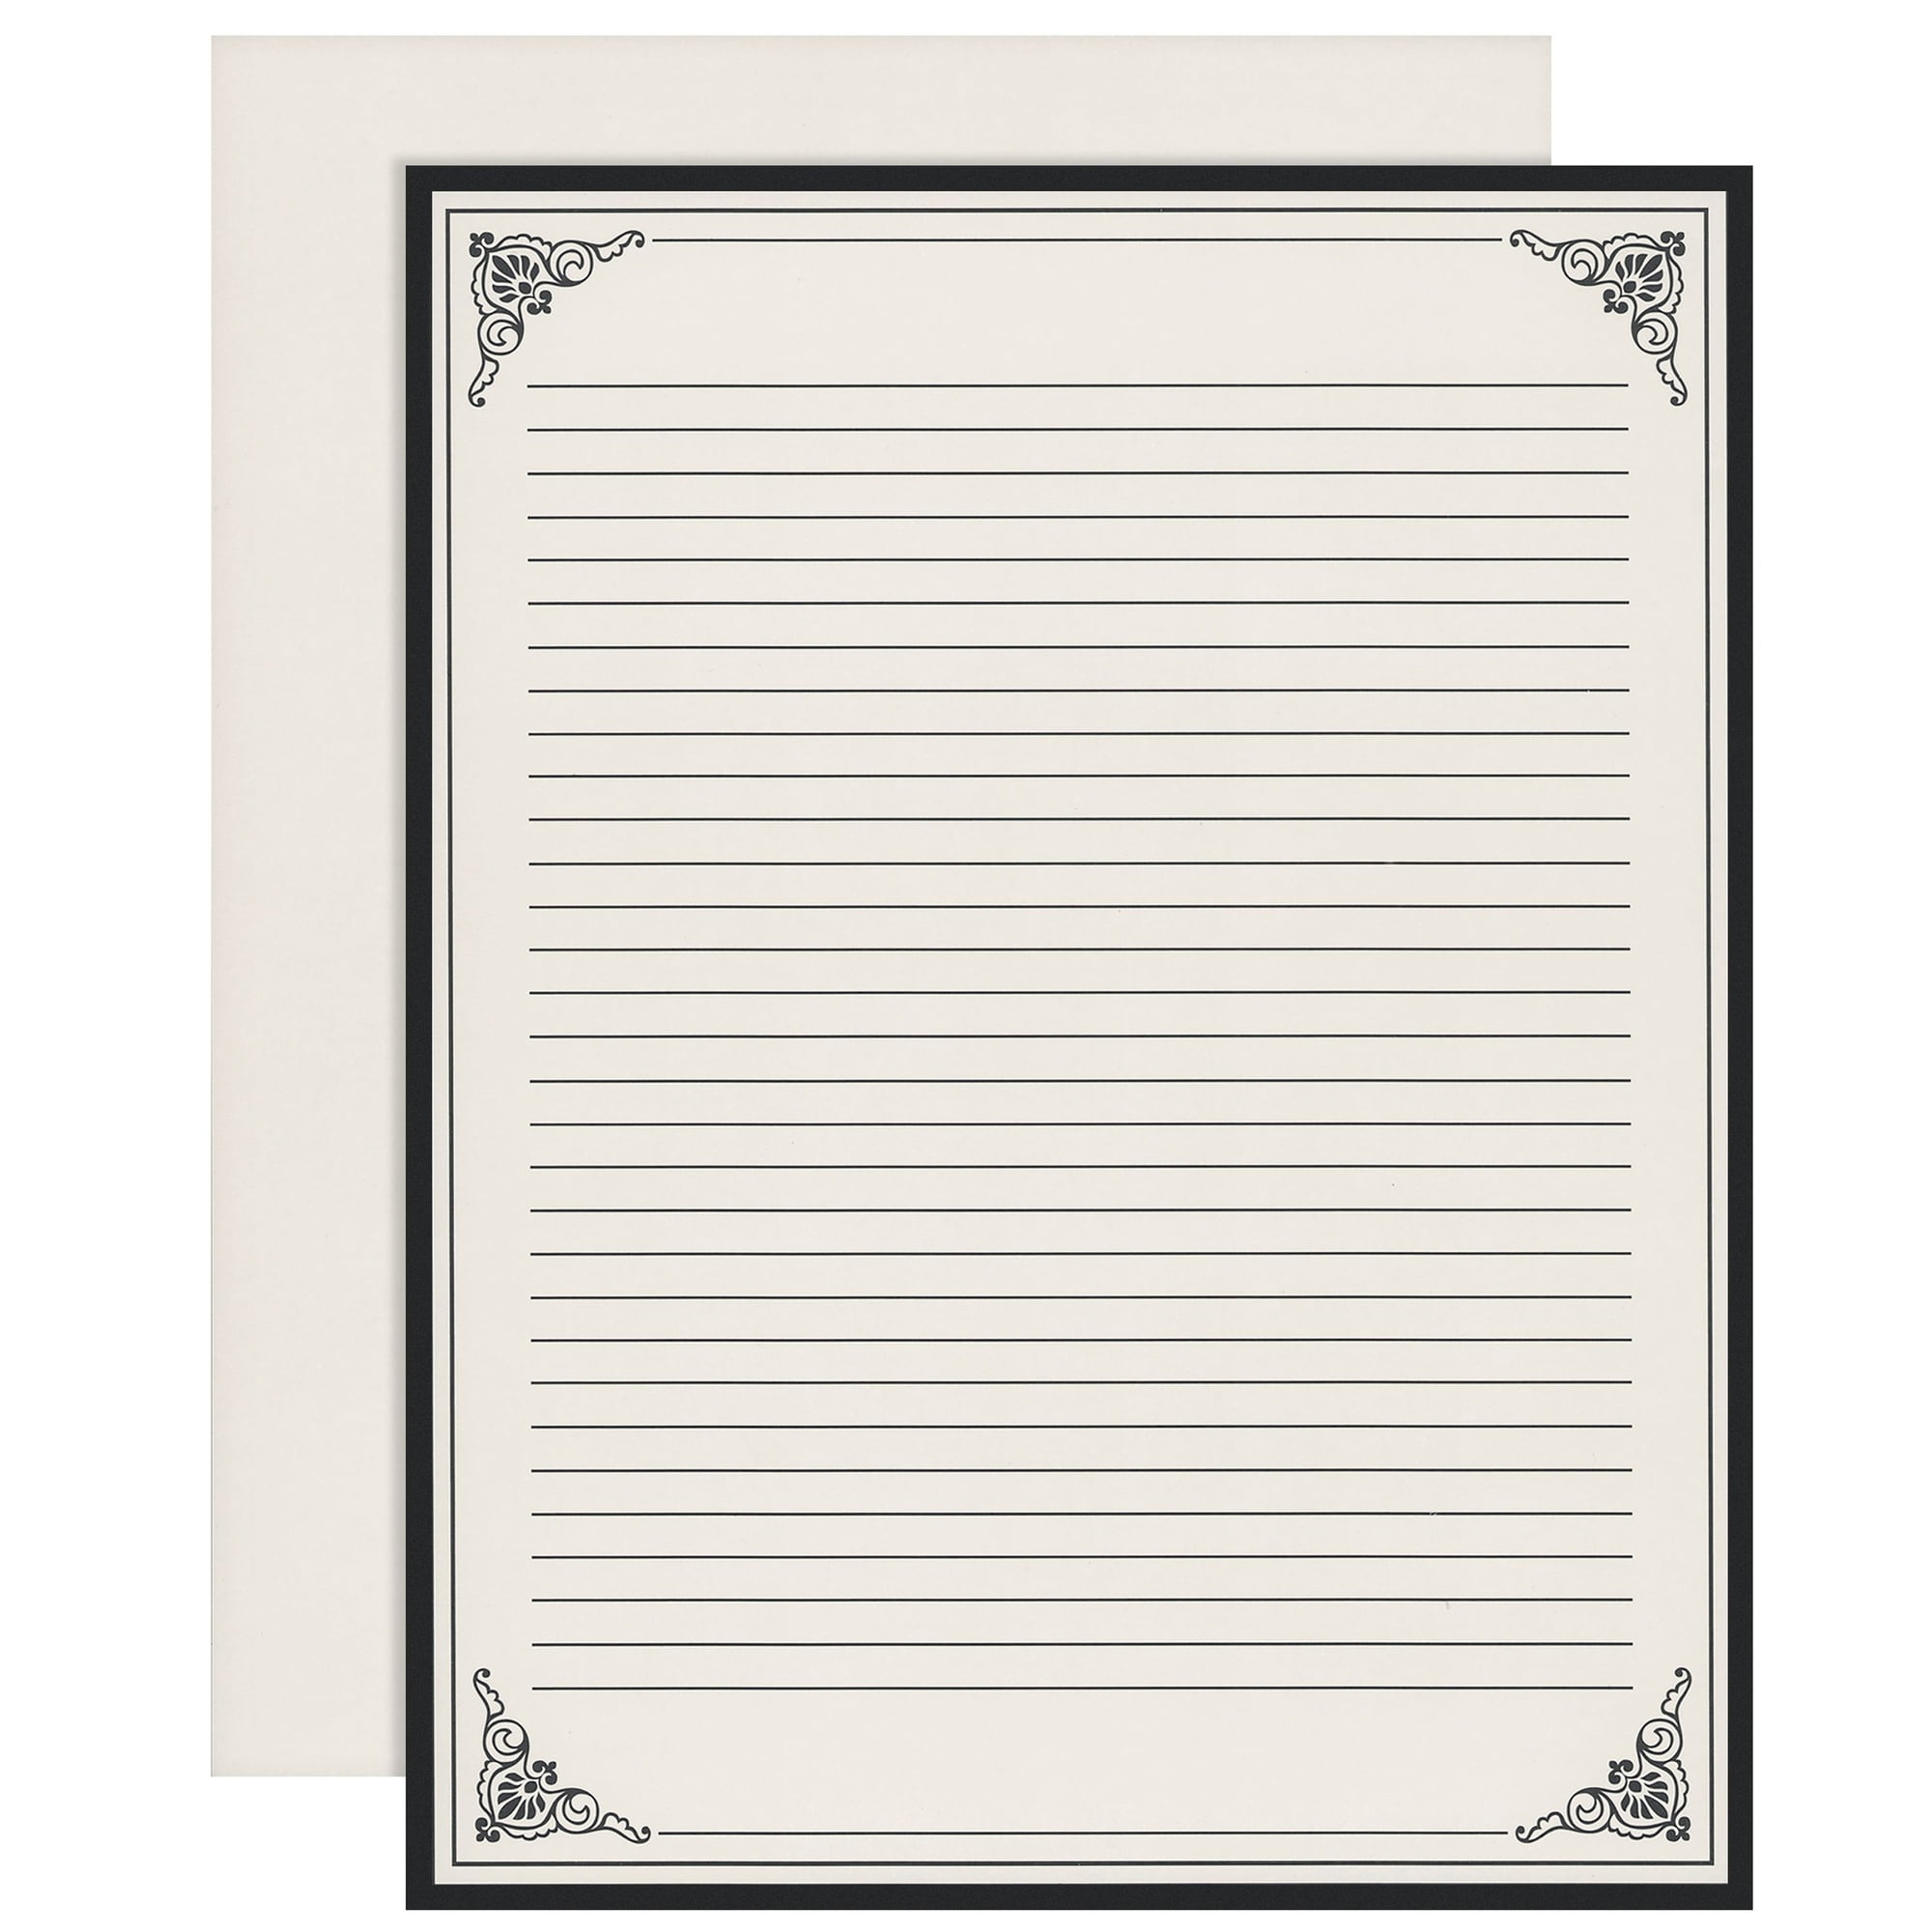 Vintage Lined Stationery Paper for Writing Letters (Cream, 8.5 x 11 in, 48 Sheets)